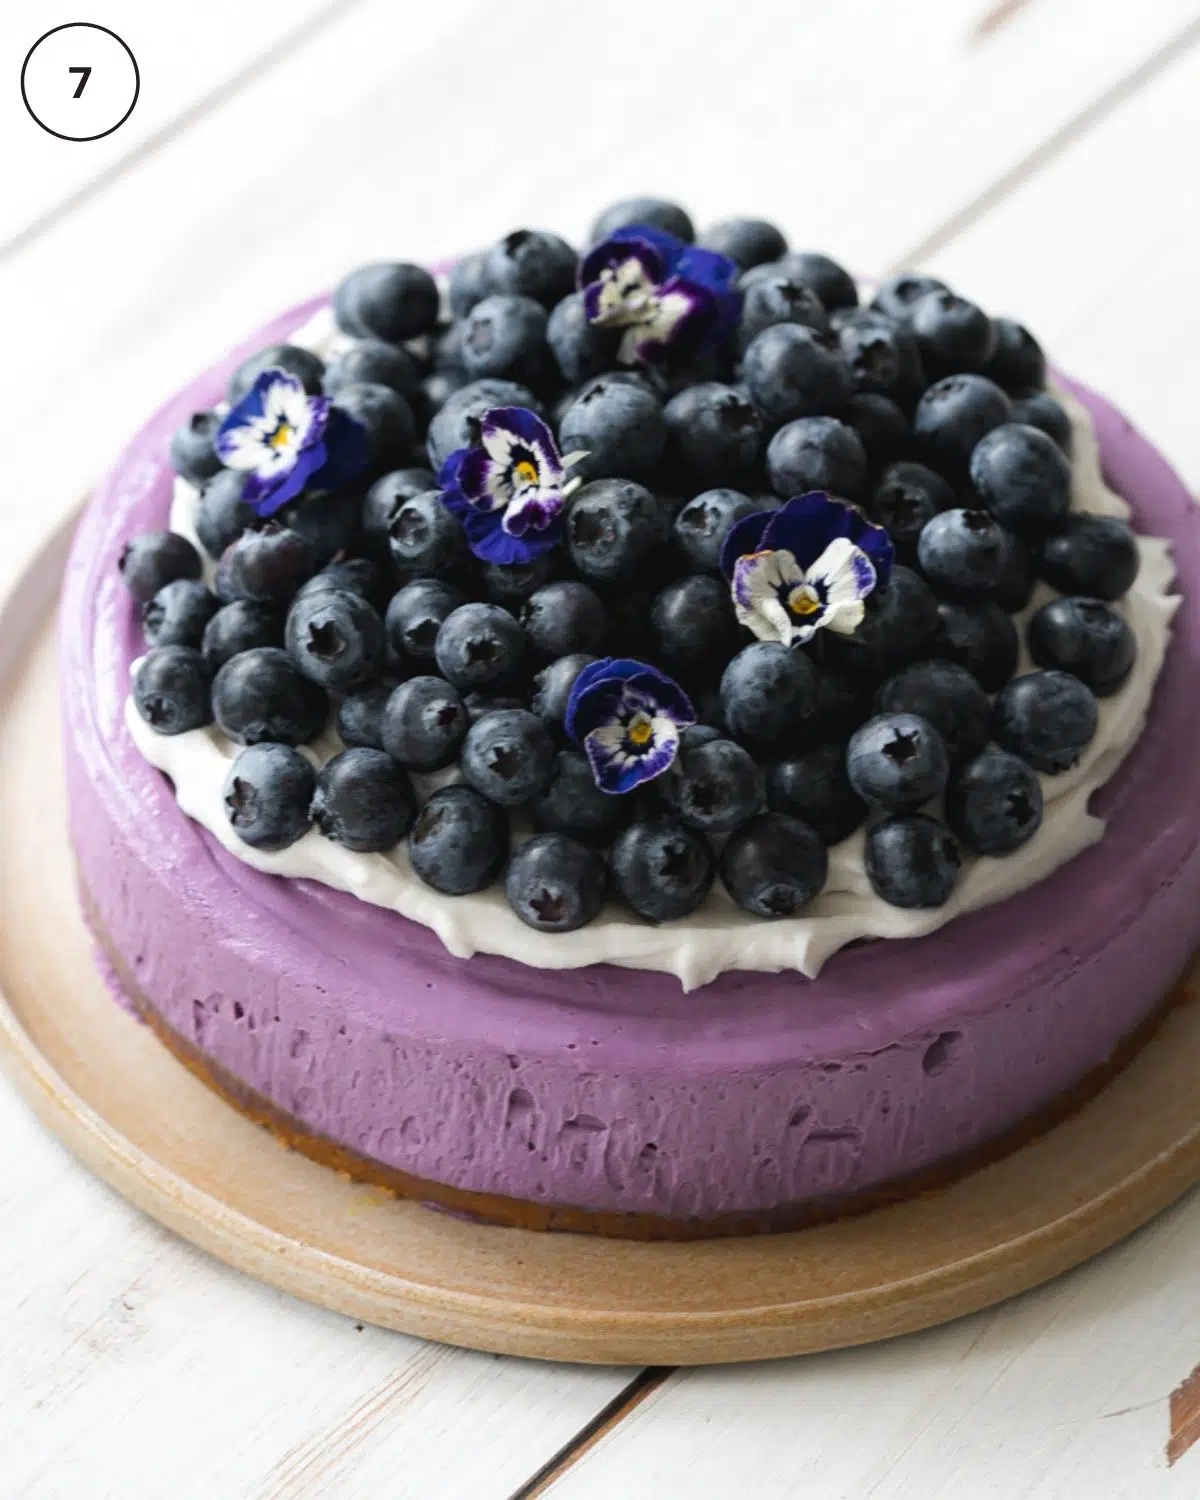 blueberry cheesecake on a ceramic plate with cream and fresh blueberries on top.